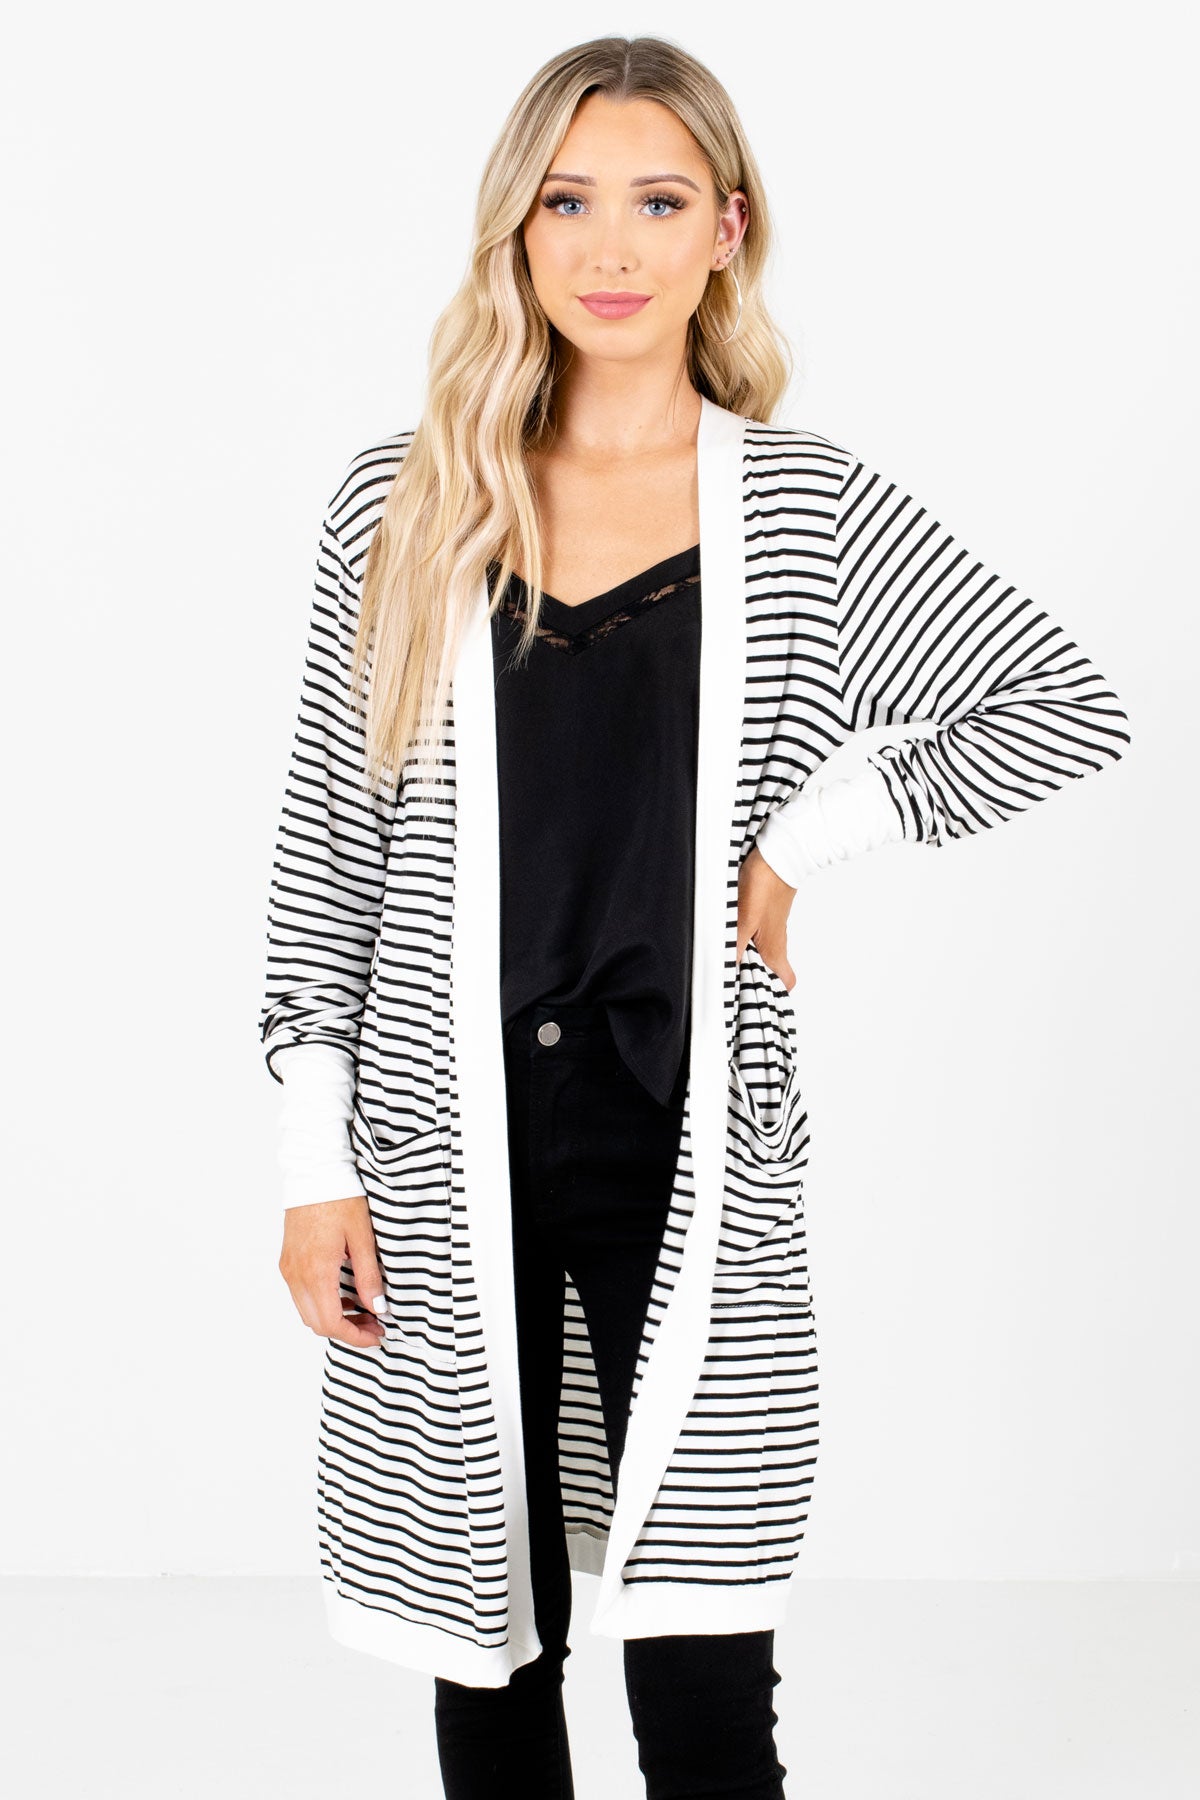 White and Black Striped Pattern Boutique Cardigans for Women